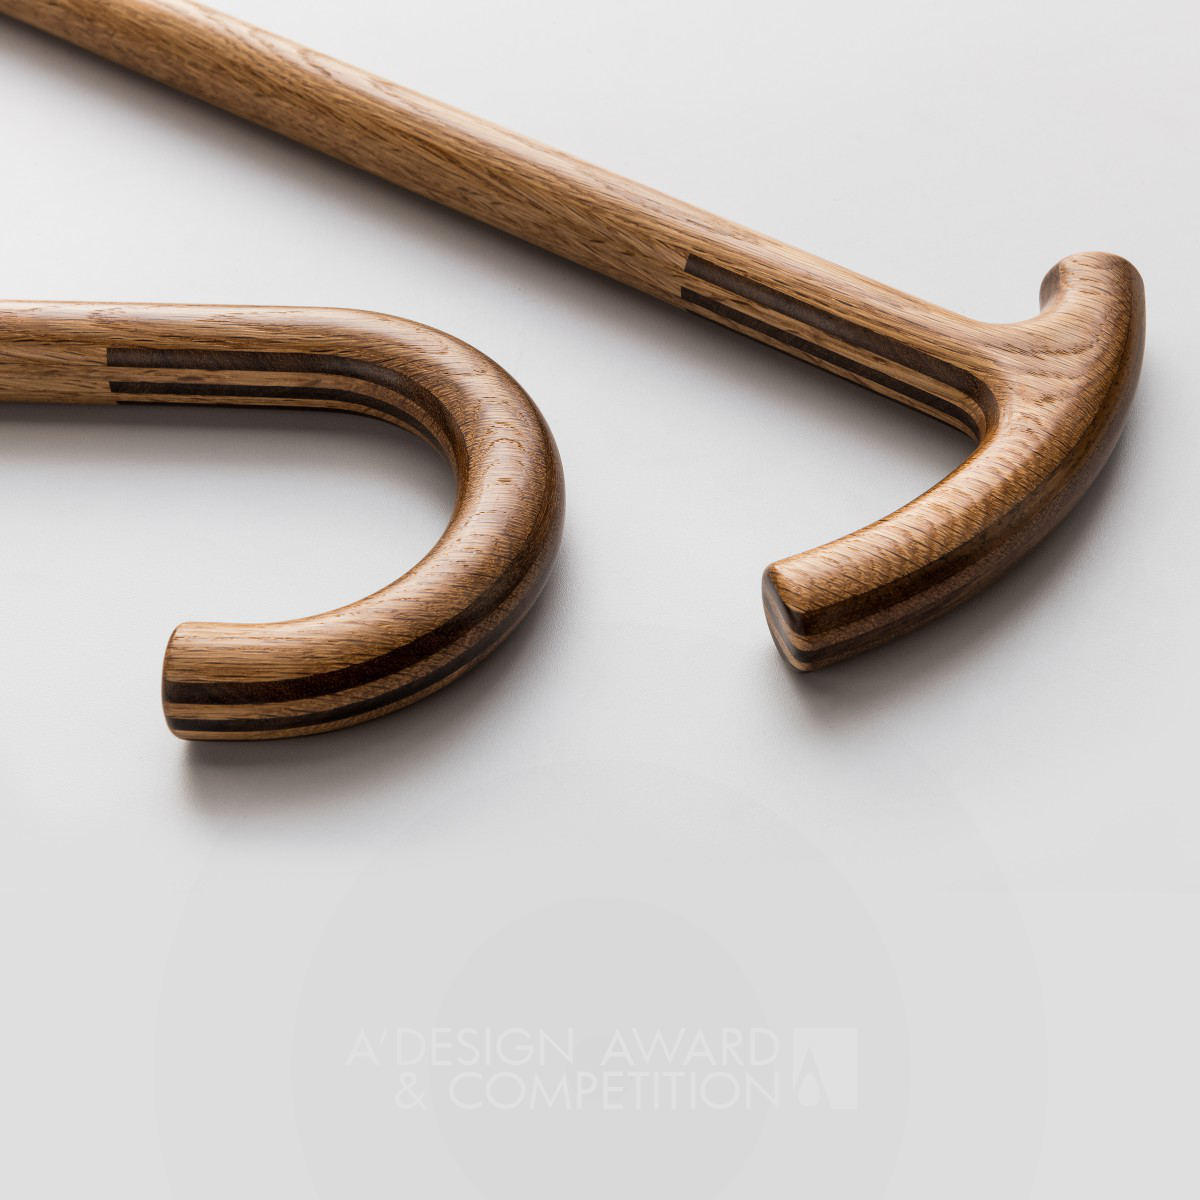 Exquisite Handcrafted Walking Sticks by Ãlvaro Wolmer